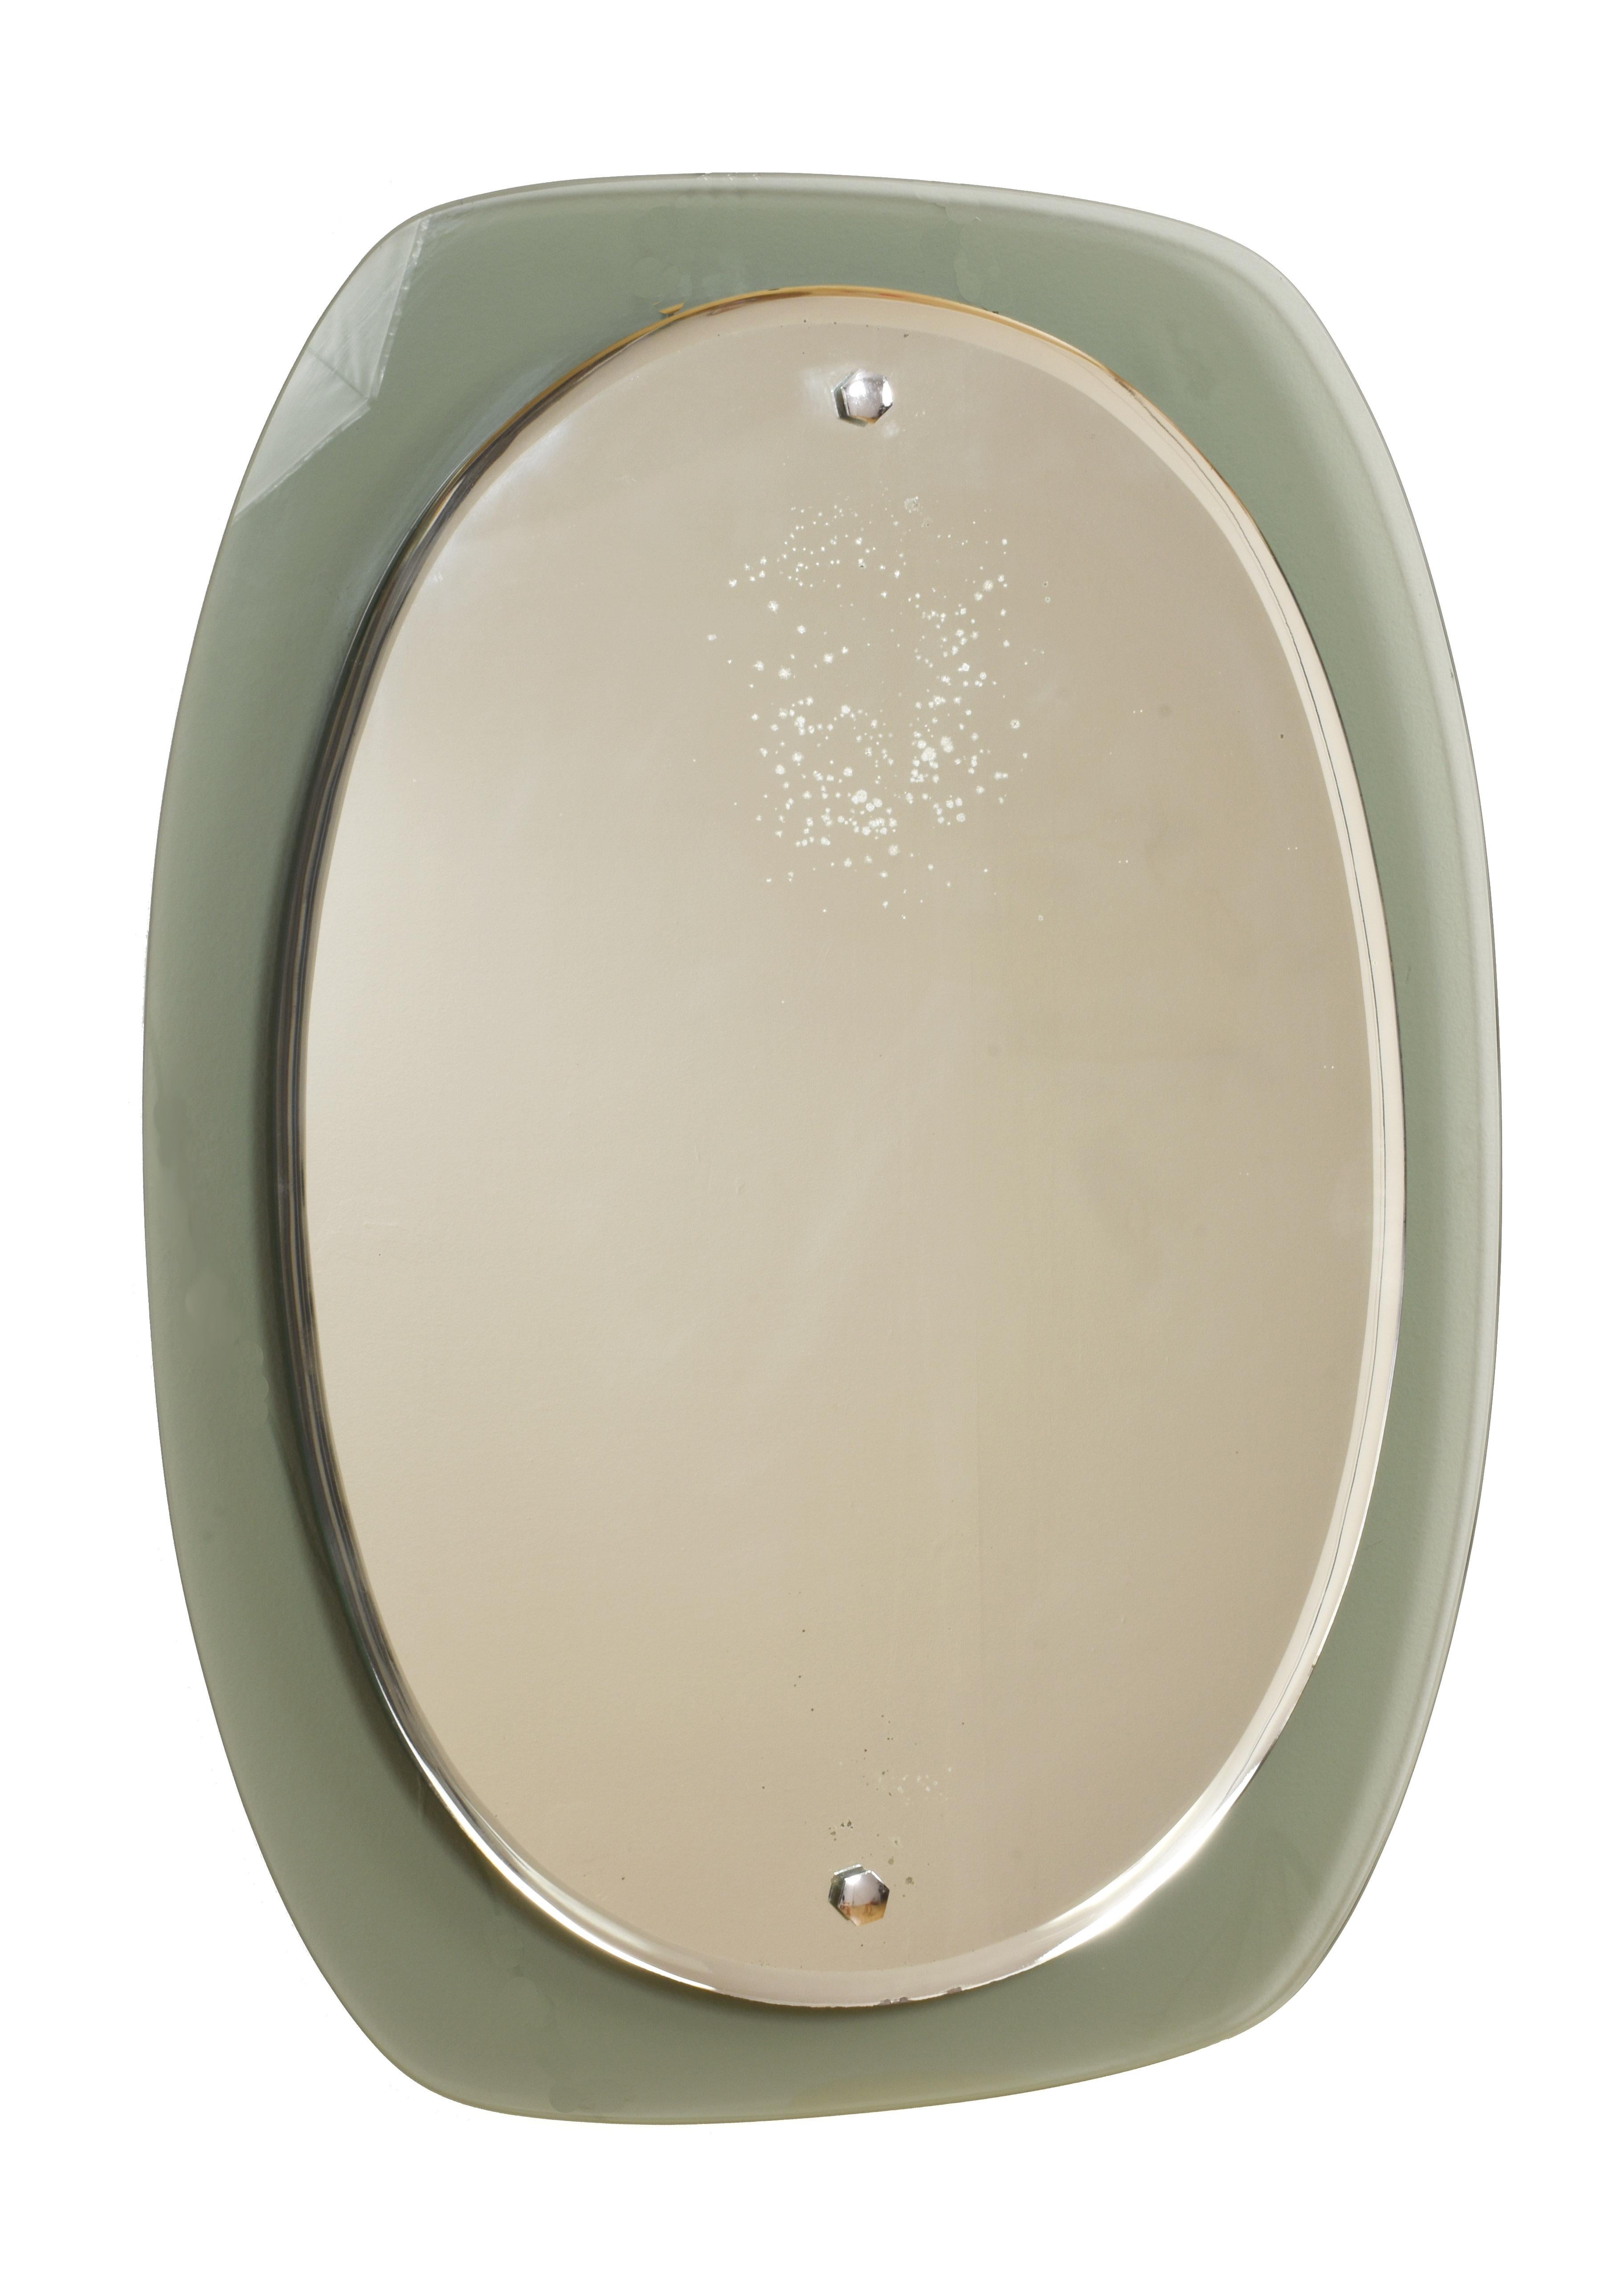 This bevelled mirror was produced in the 1960s. It features a caramel glass frame and nickel-plated brass screw heads.